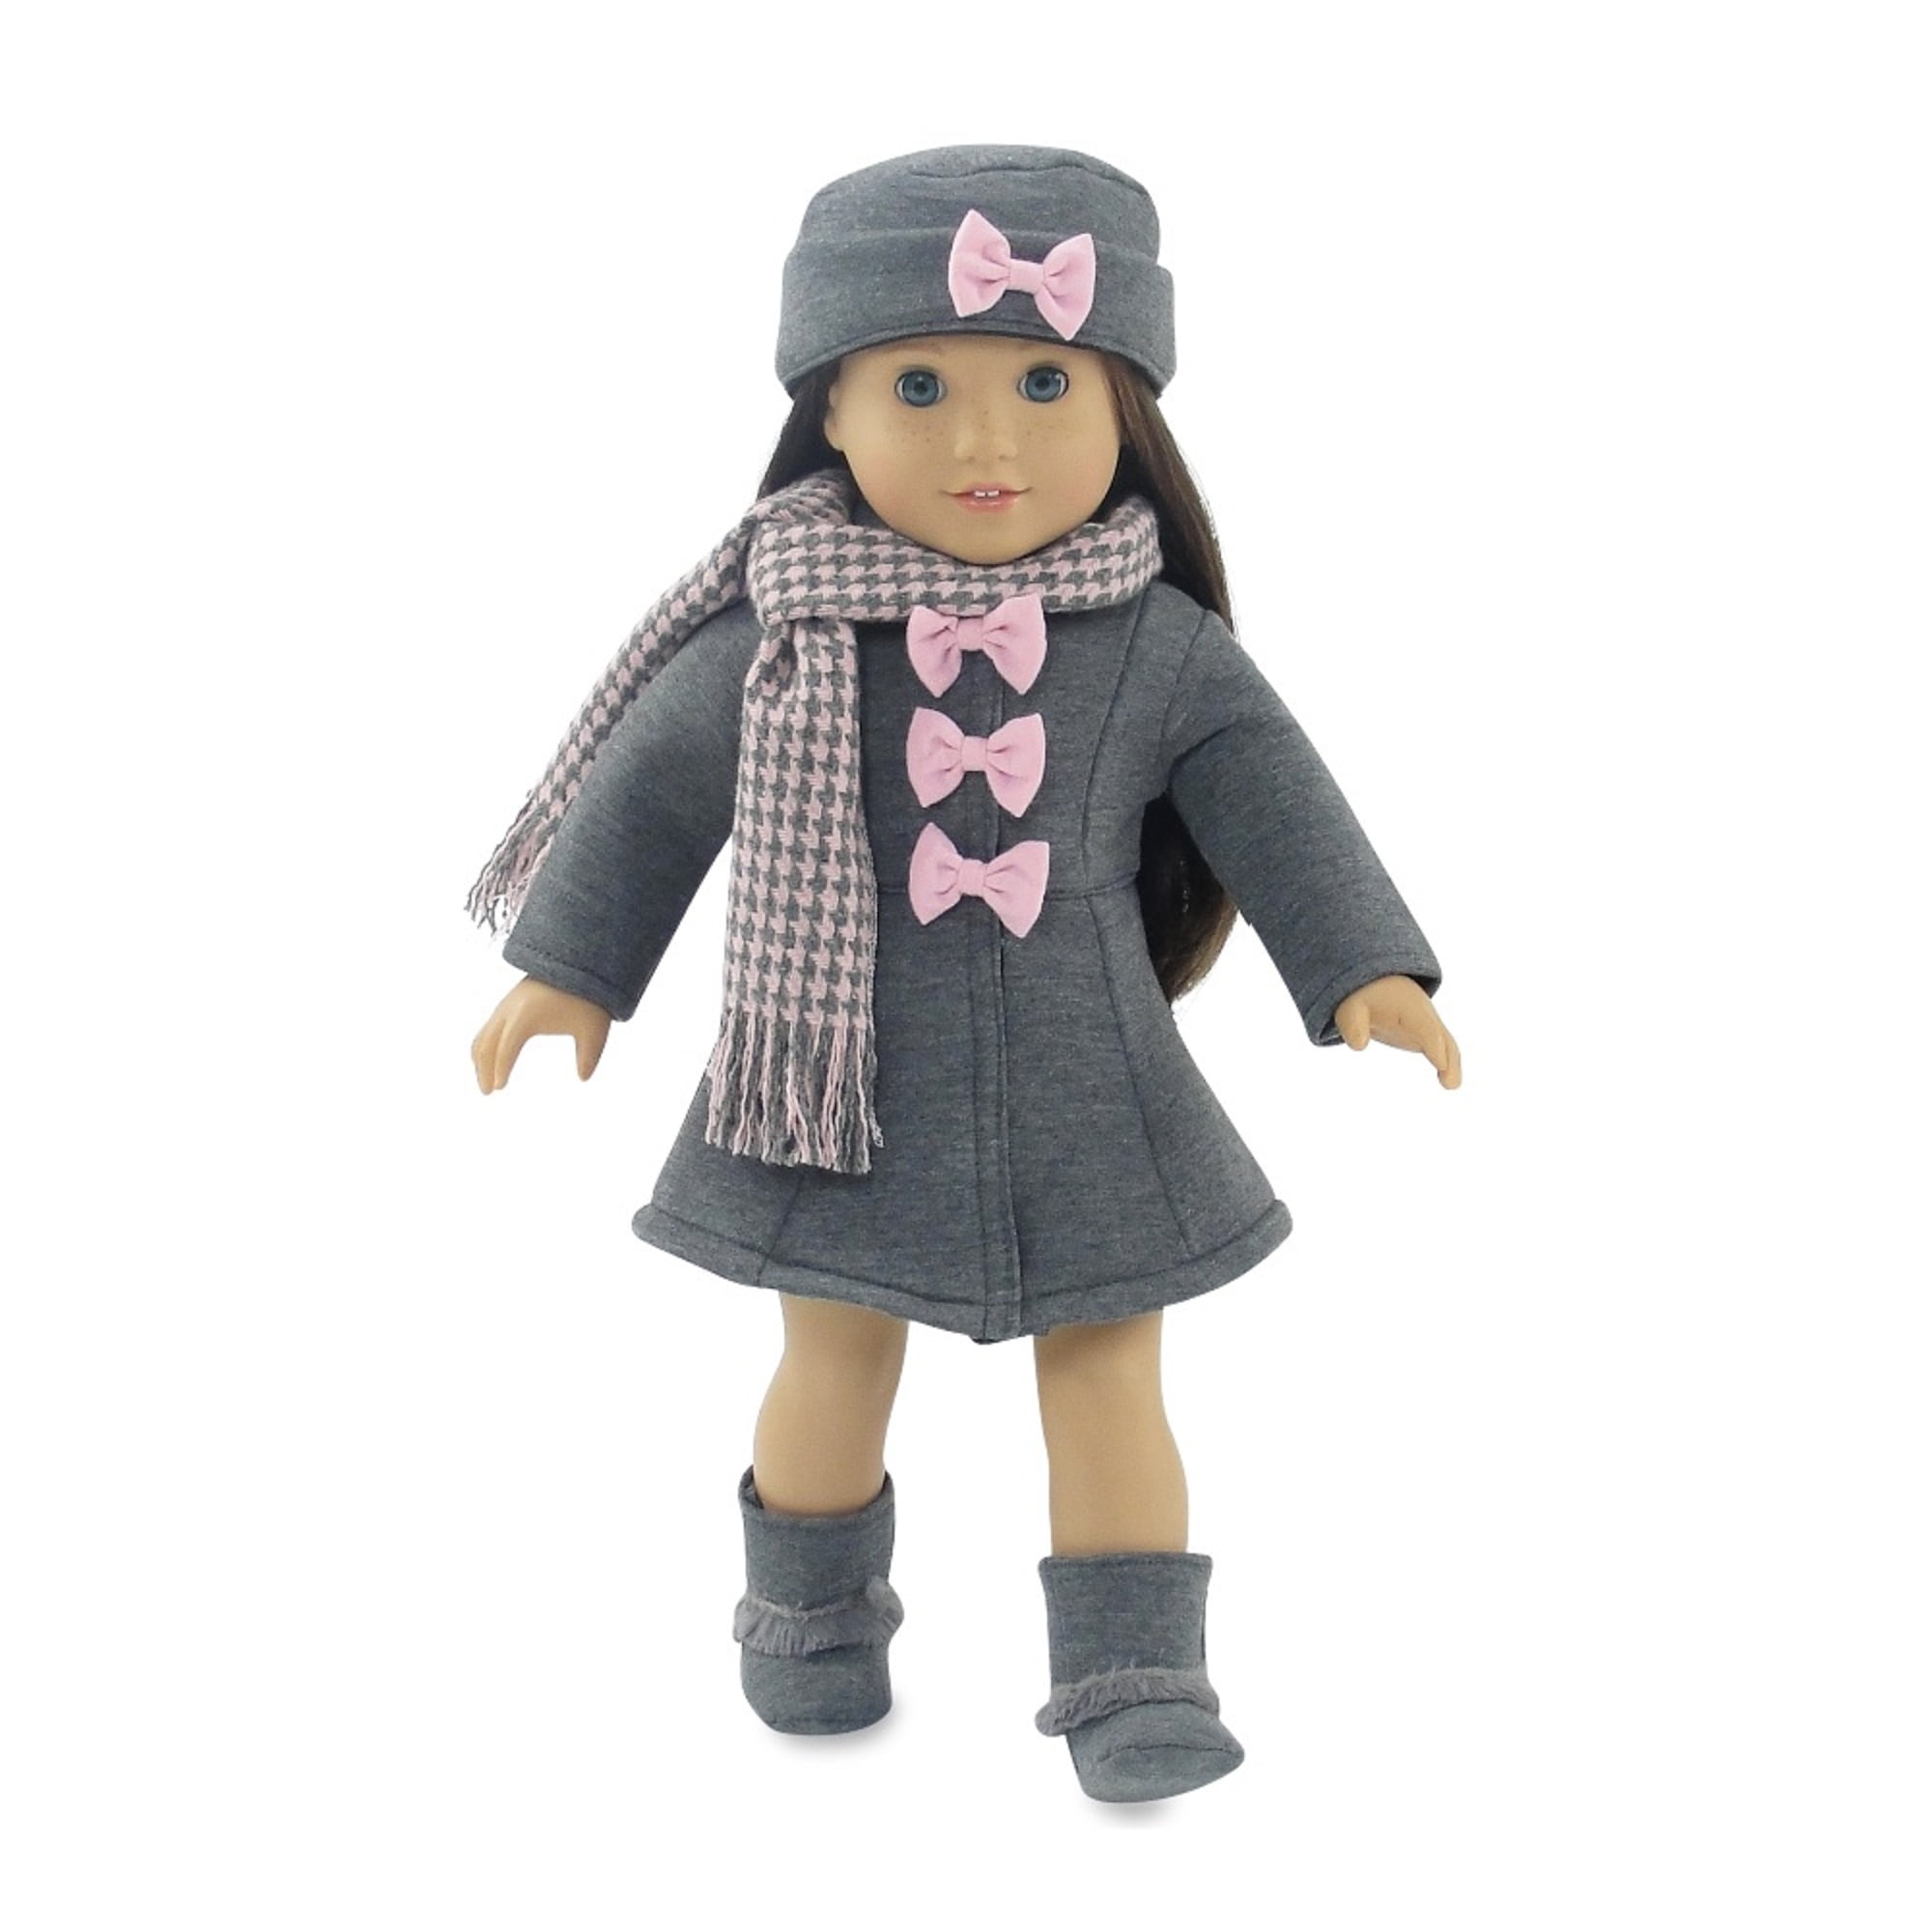 Pink print shirt only 18 inch doll clothing Fits like American girl doll clothes .18 inch doll clothes